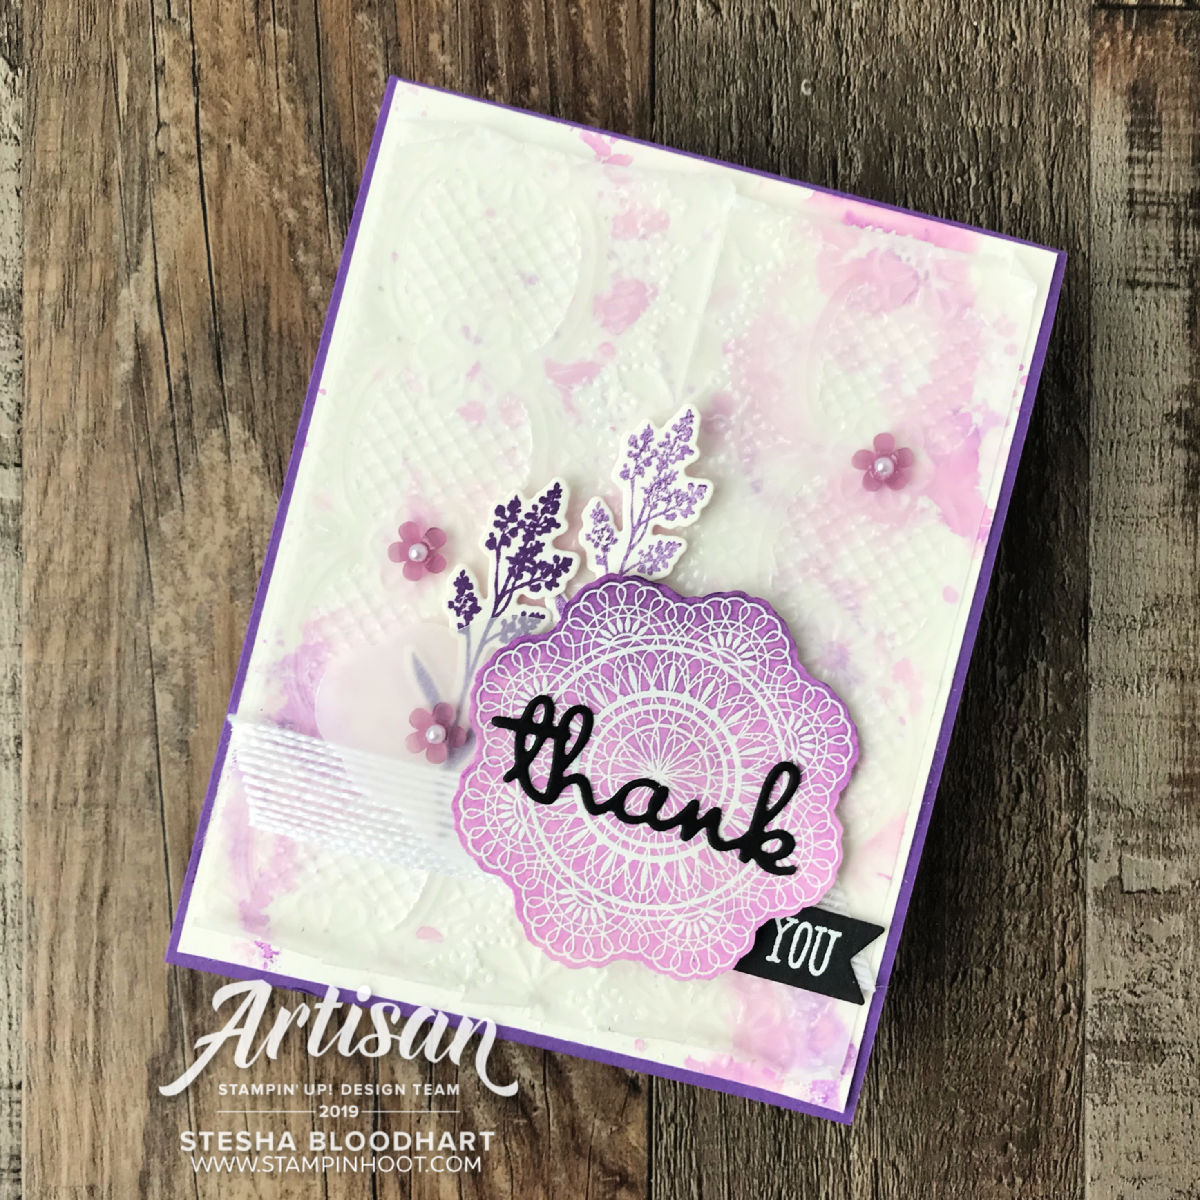 Dear Doily and Well Said Bundles by Stampin' Up! 2019 Artisan Design Team Created by member Stesha Bloodhart Stampin' Hoot! 